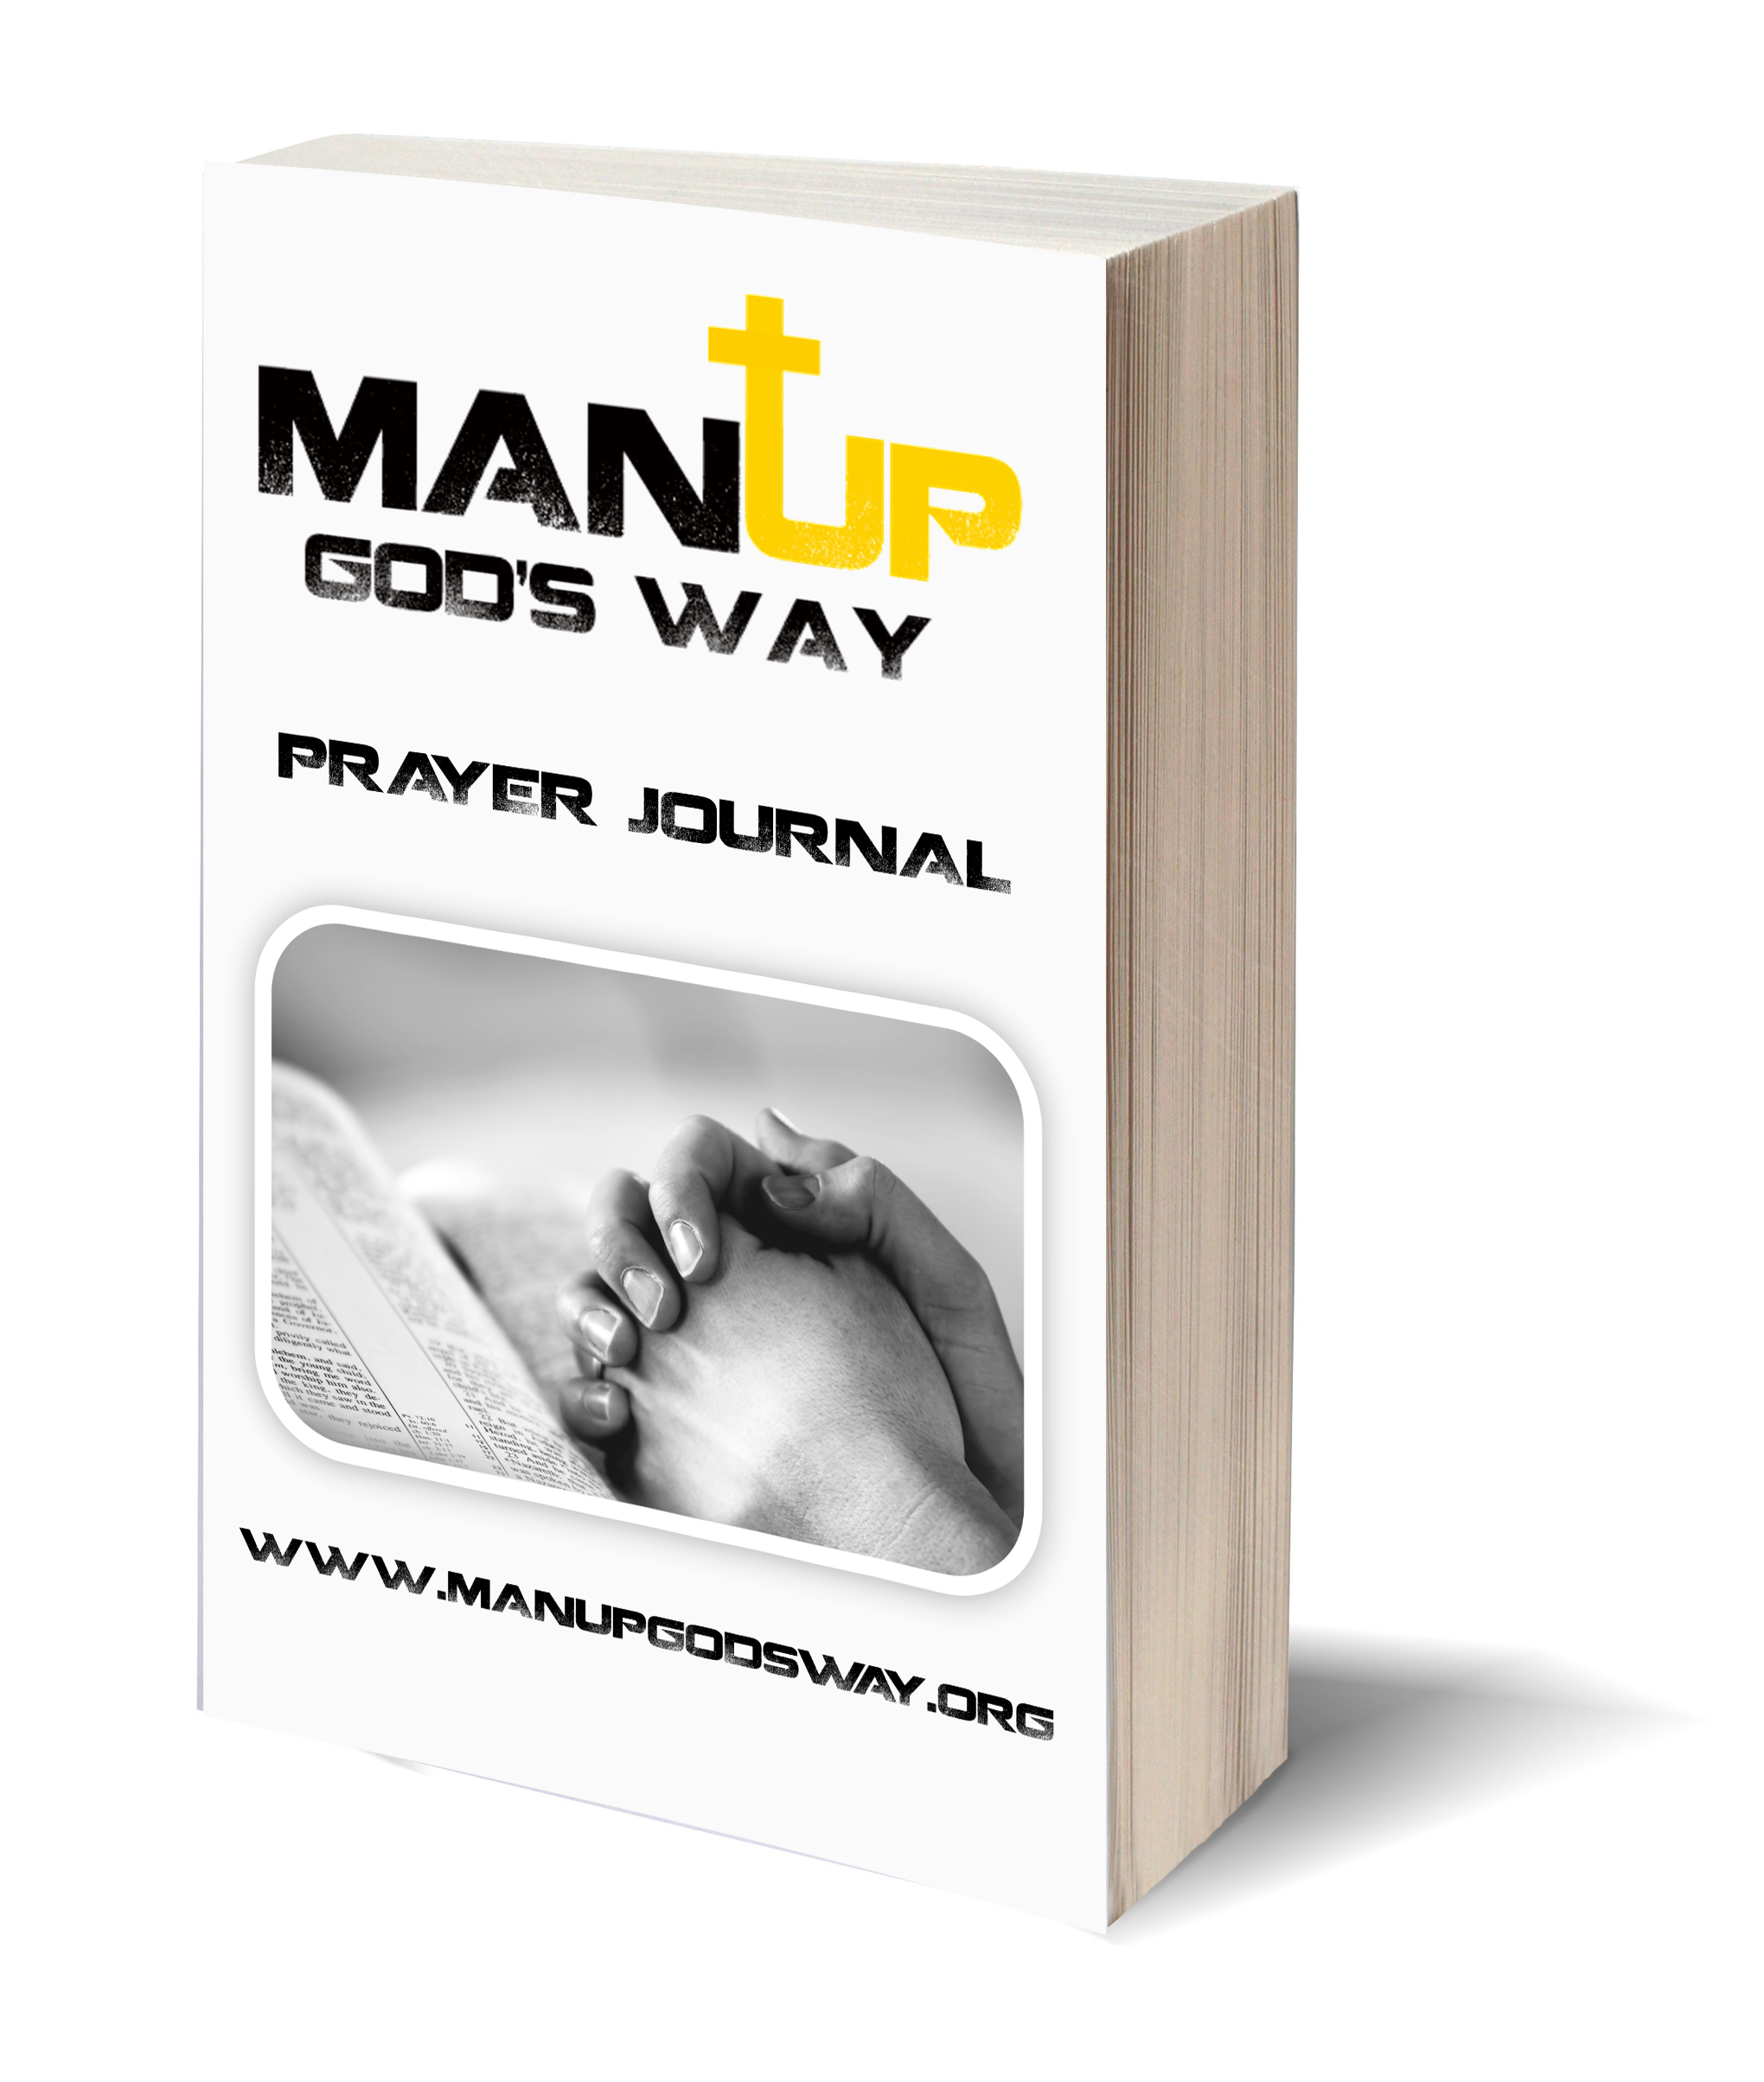 Man up! Becoming a Godly man in an unGodly world